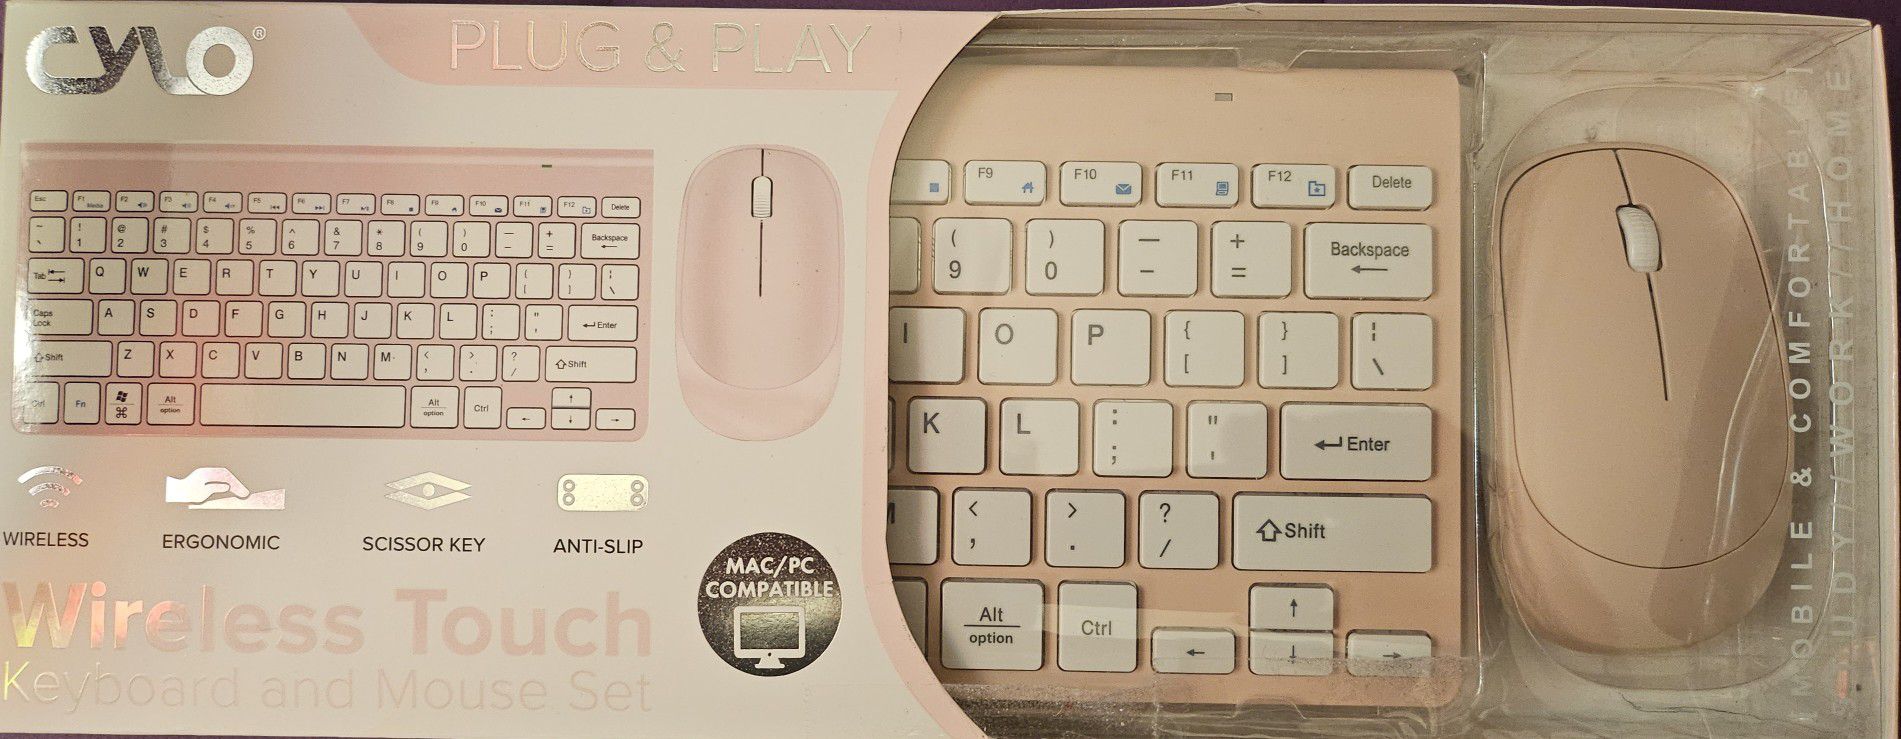 Cylo Wireless Keyboard And Mouse Set (Pink)